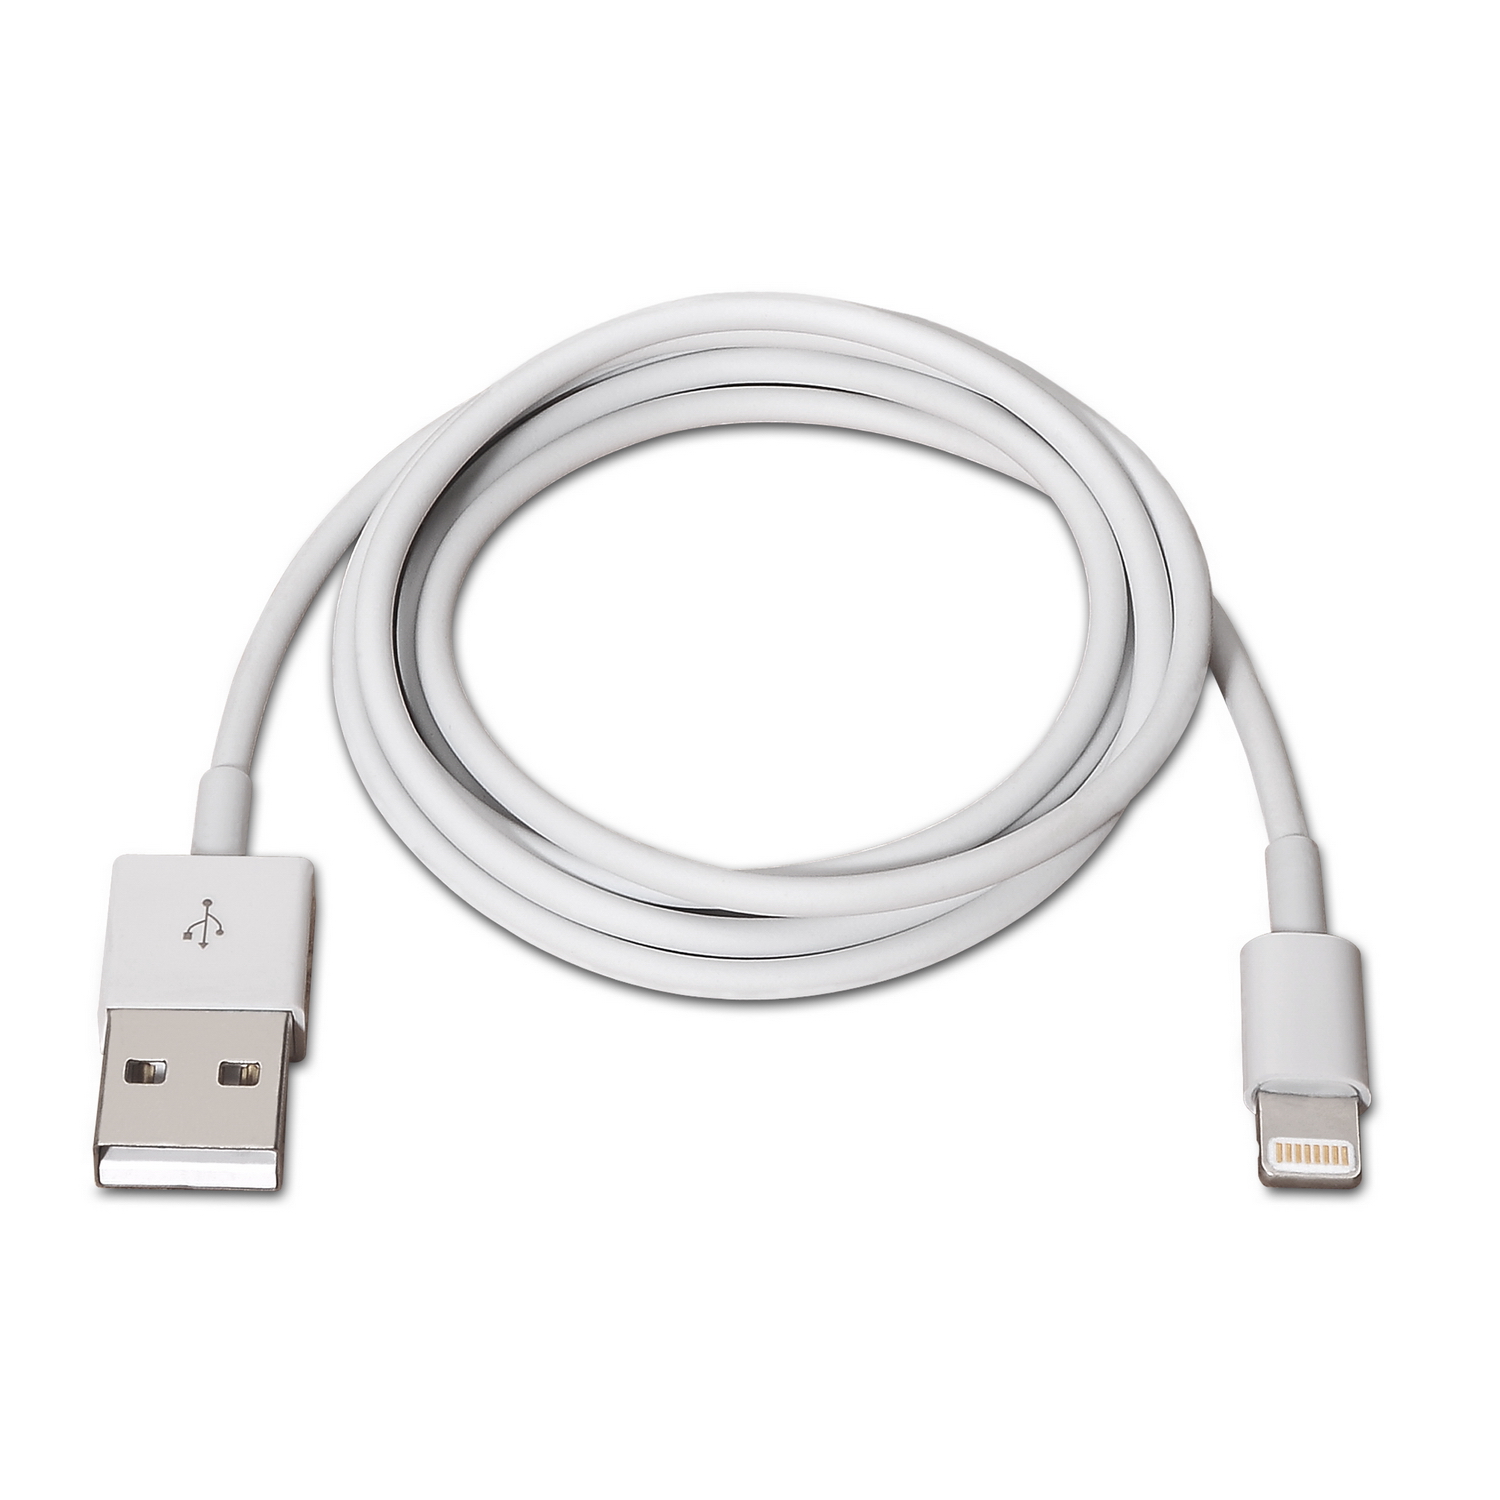 Cable 1m Lightning a USB 2.0 Blanco - Cables Lightning